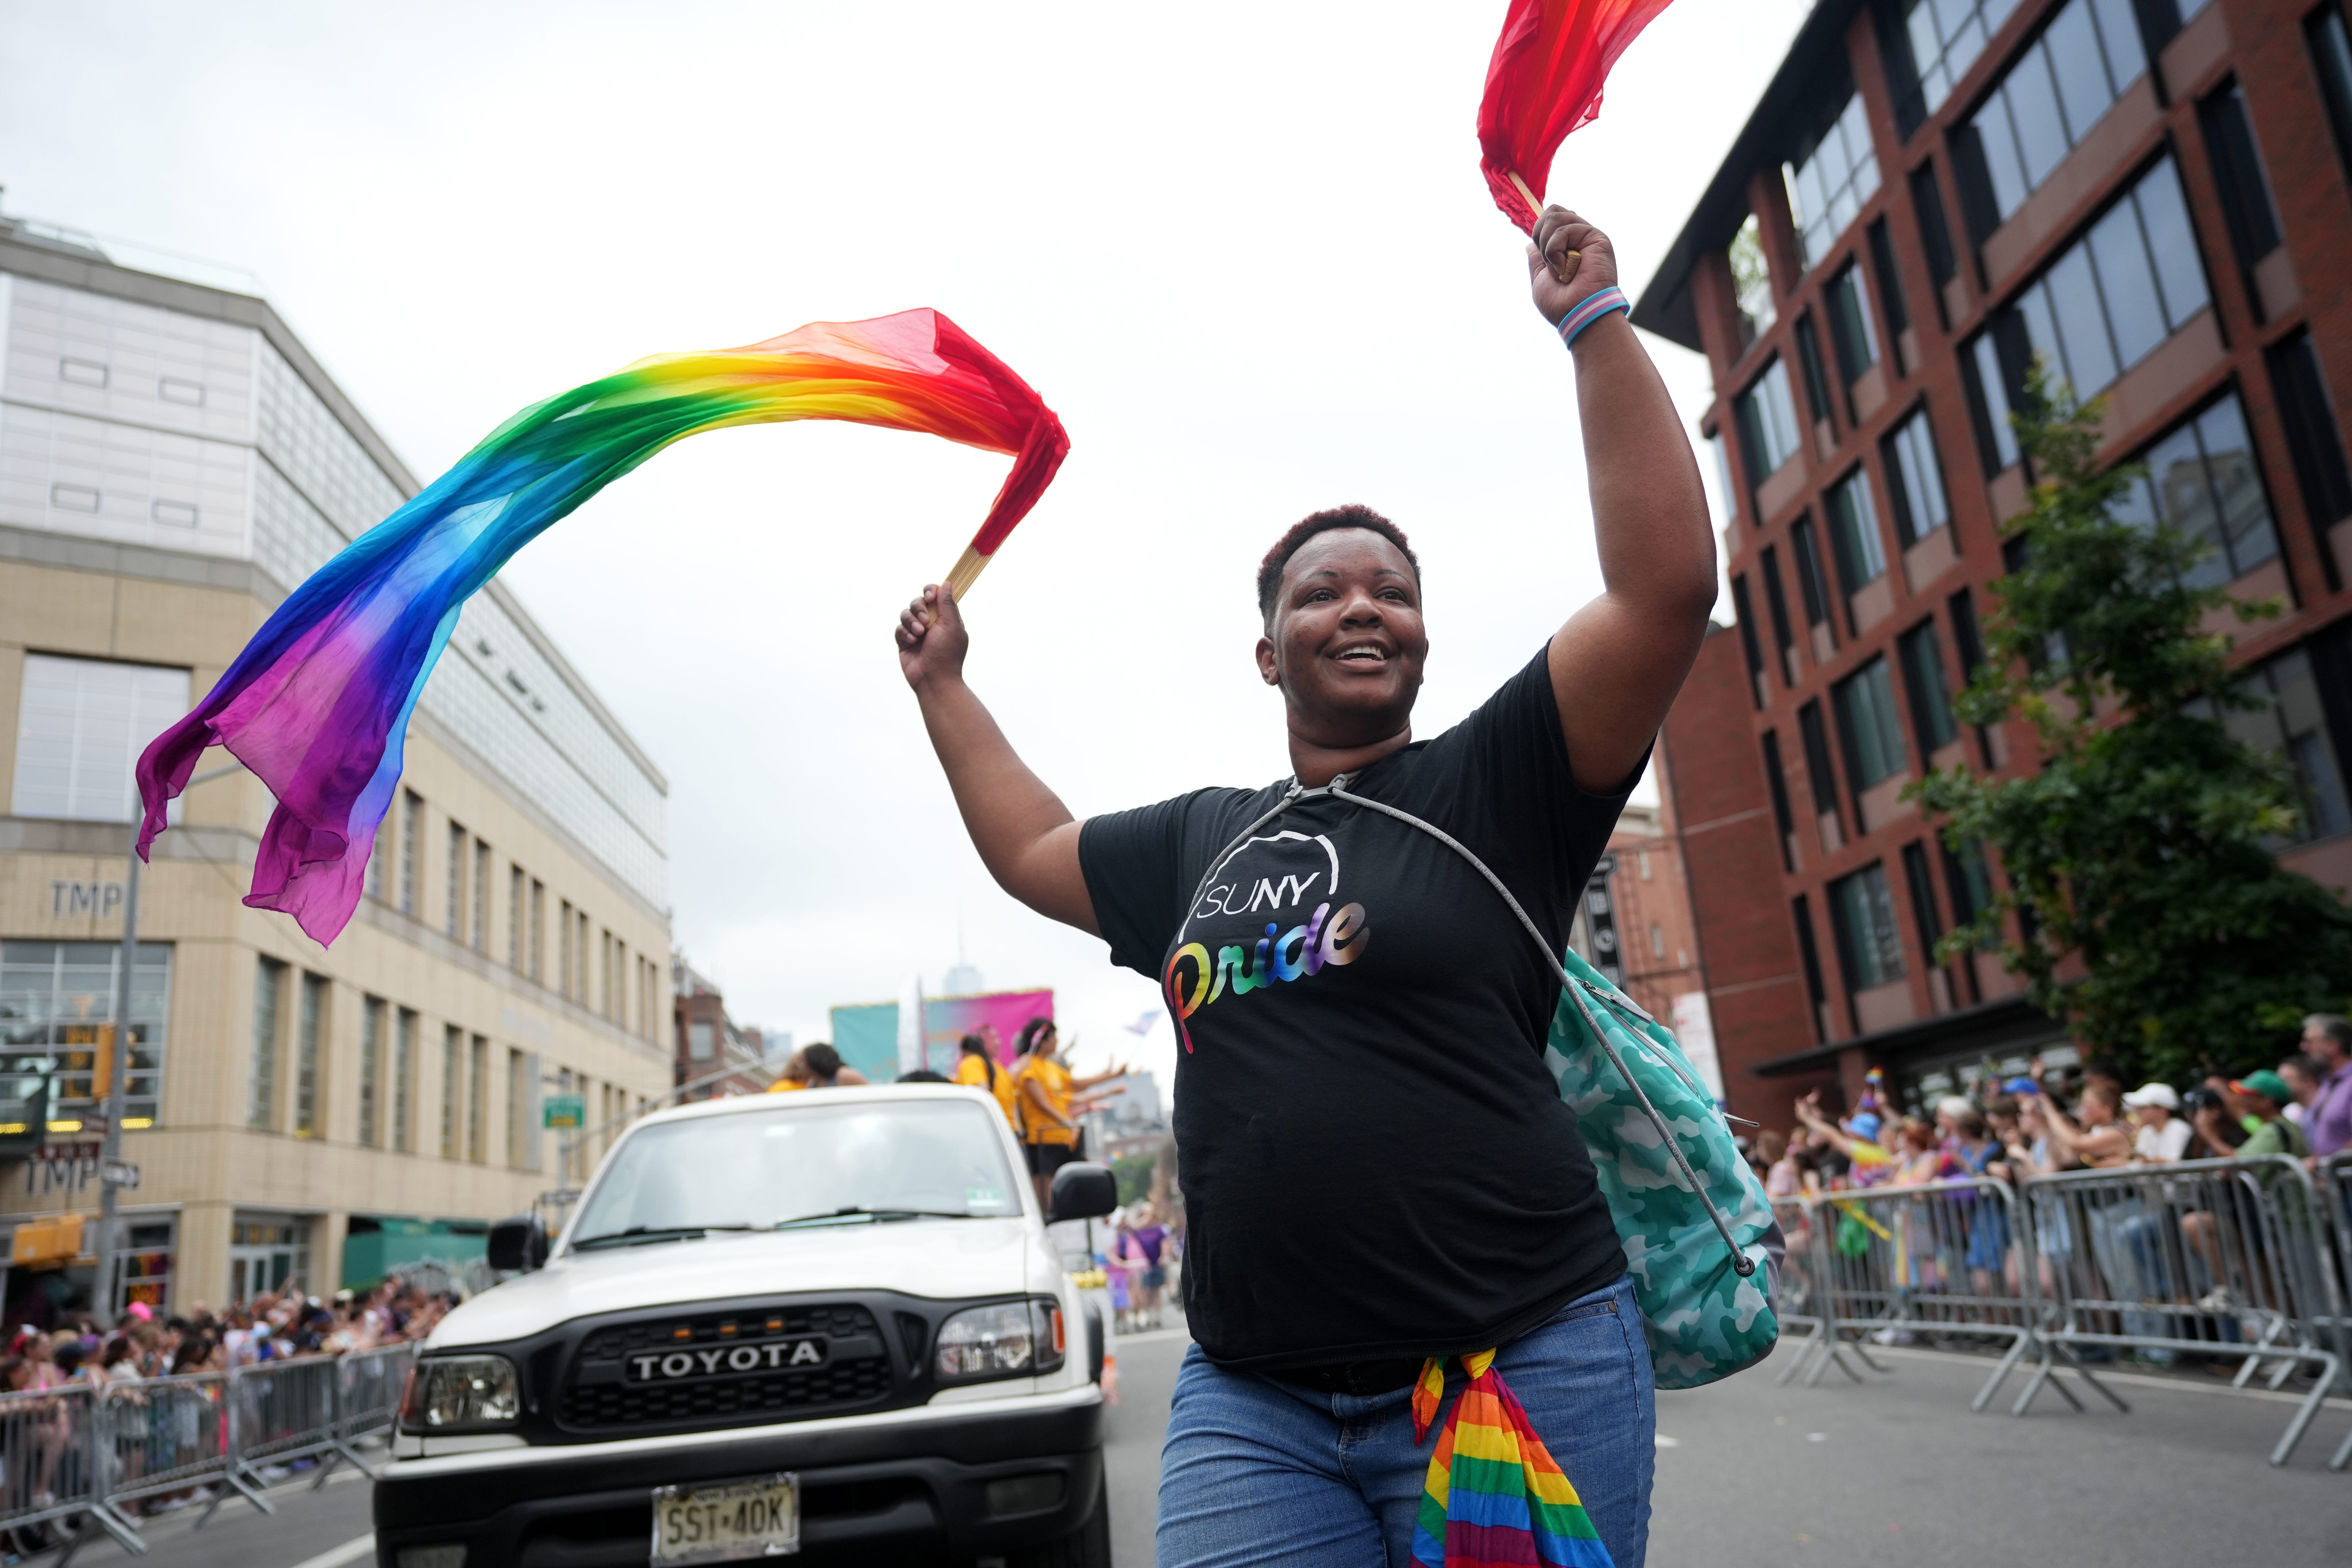 Are Pride parades passé? New ways to celebrate LGBTQIA+ diversity could expand inclusion